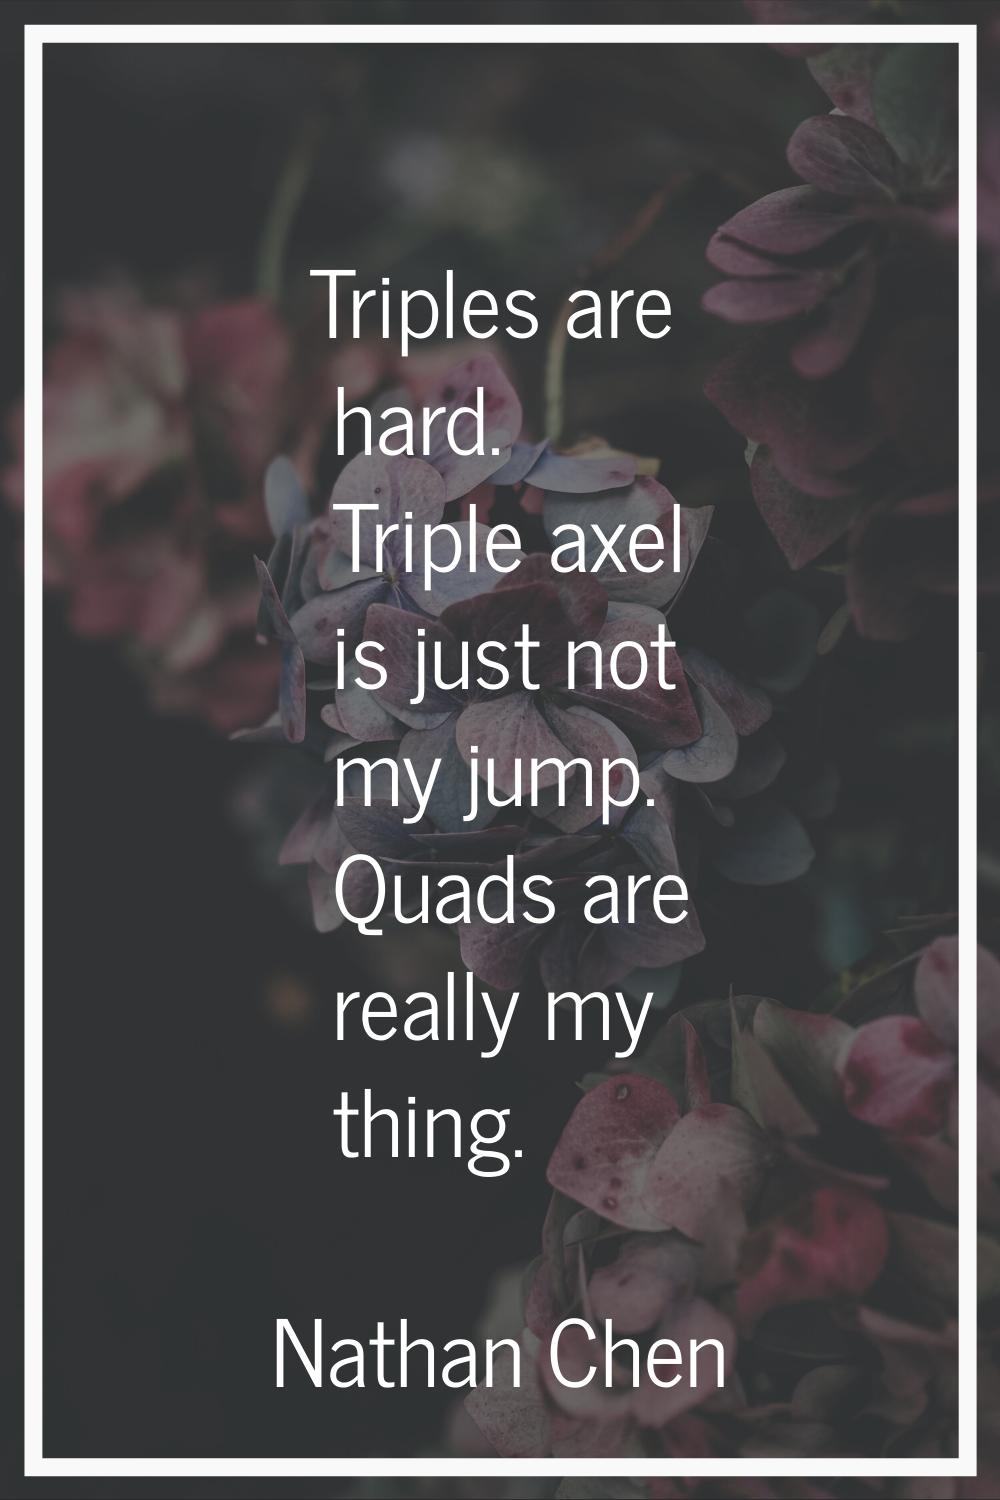 Triples are hard. Triple axel is just not my jump. Quads are really my thing.